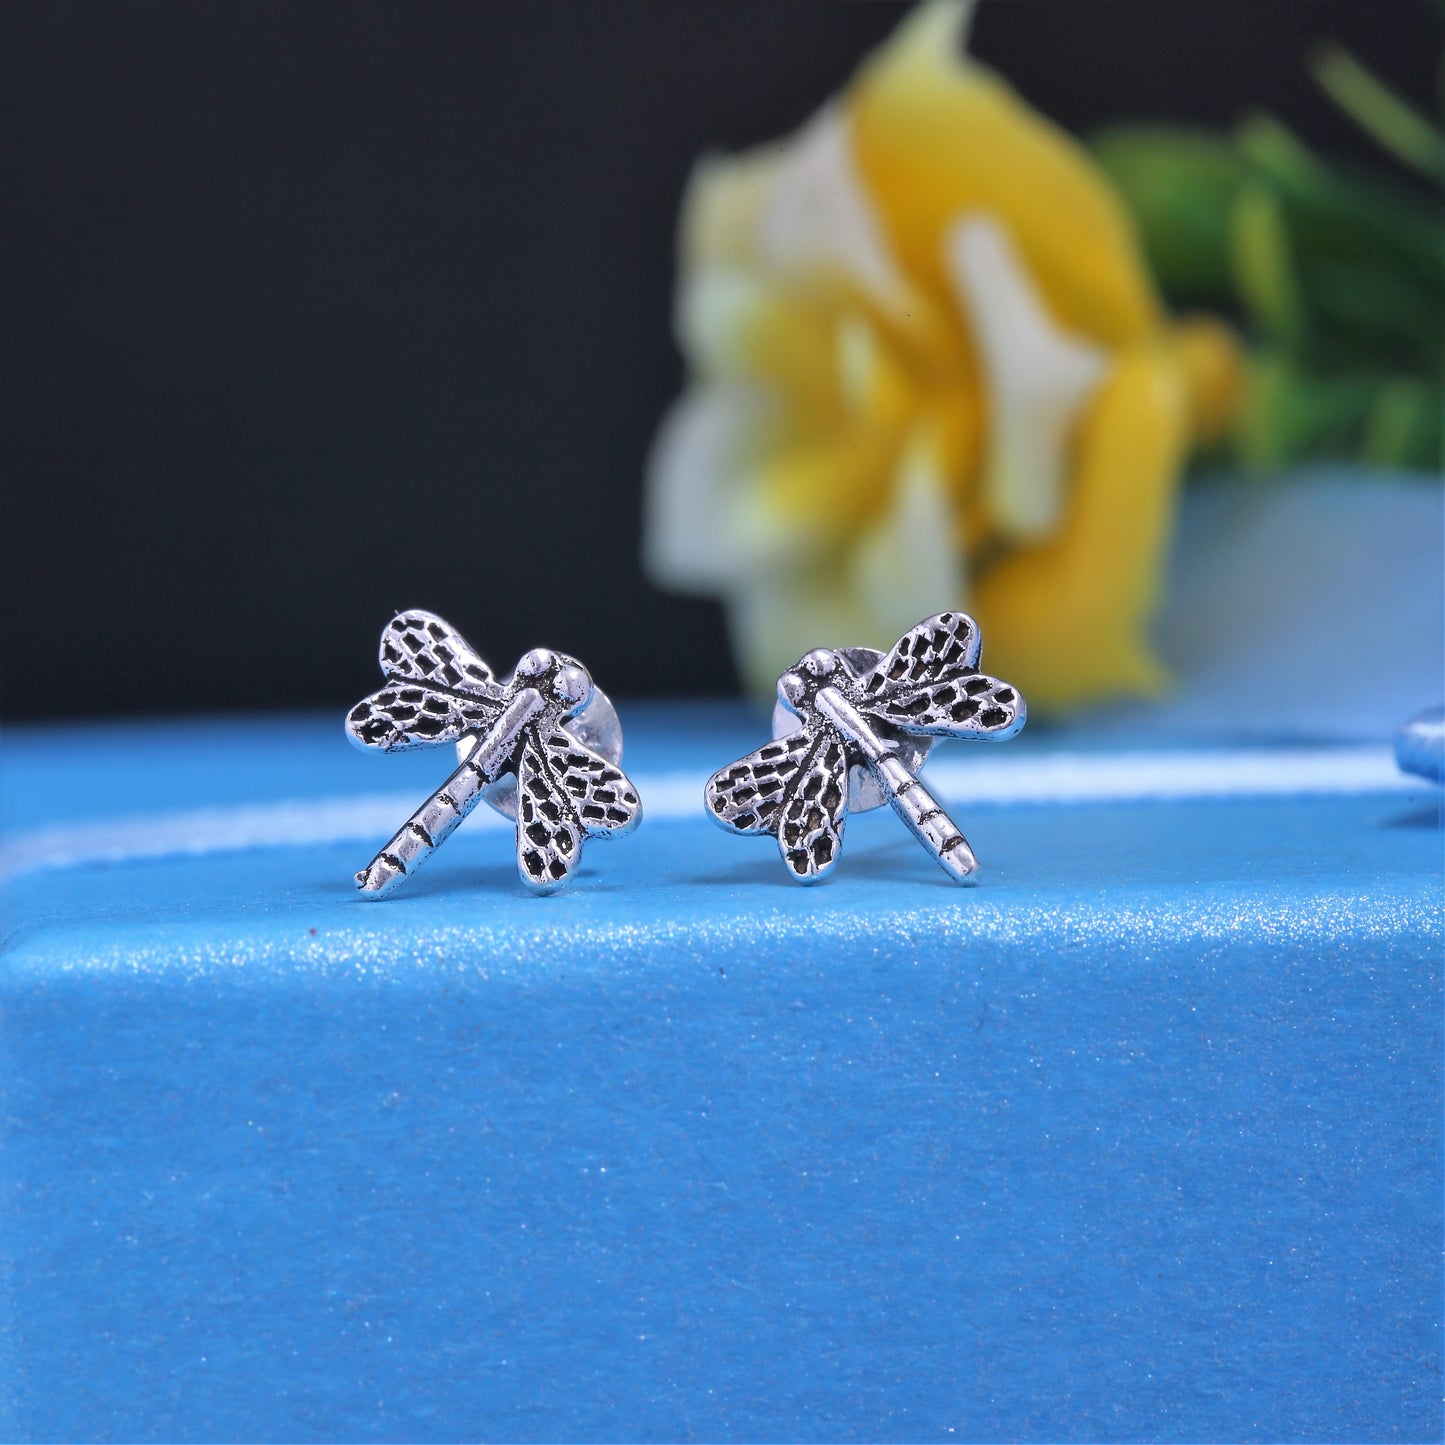 925 Sterling Silver Hypoallergenic Tiny Earrings for Babies, Kids & Girls (3 to 10 years)